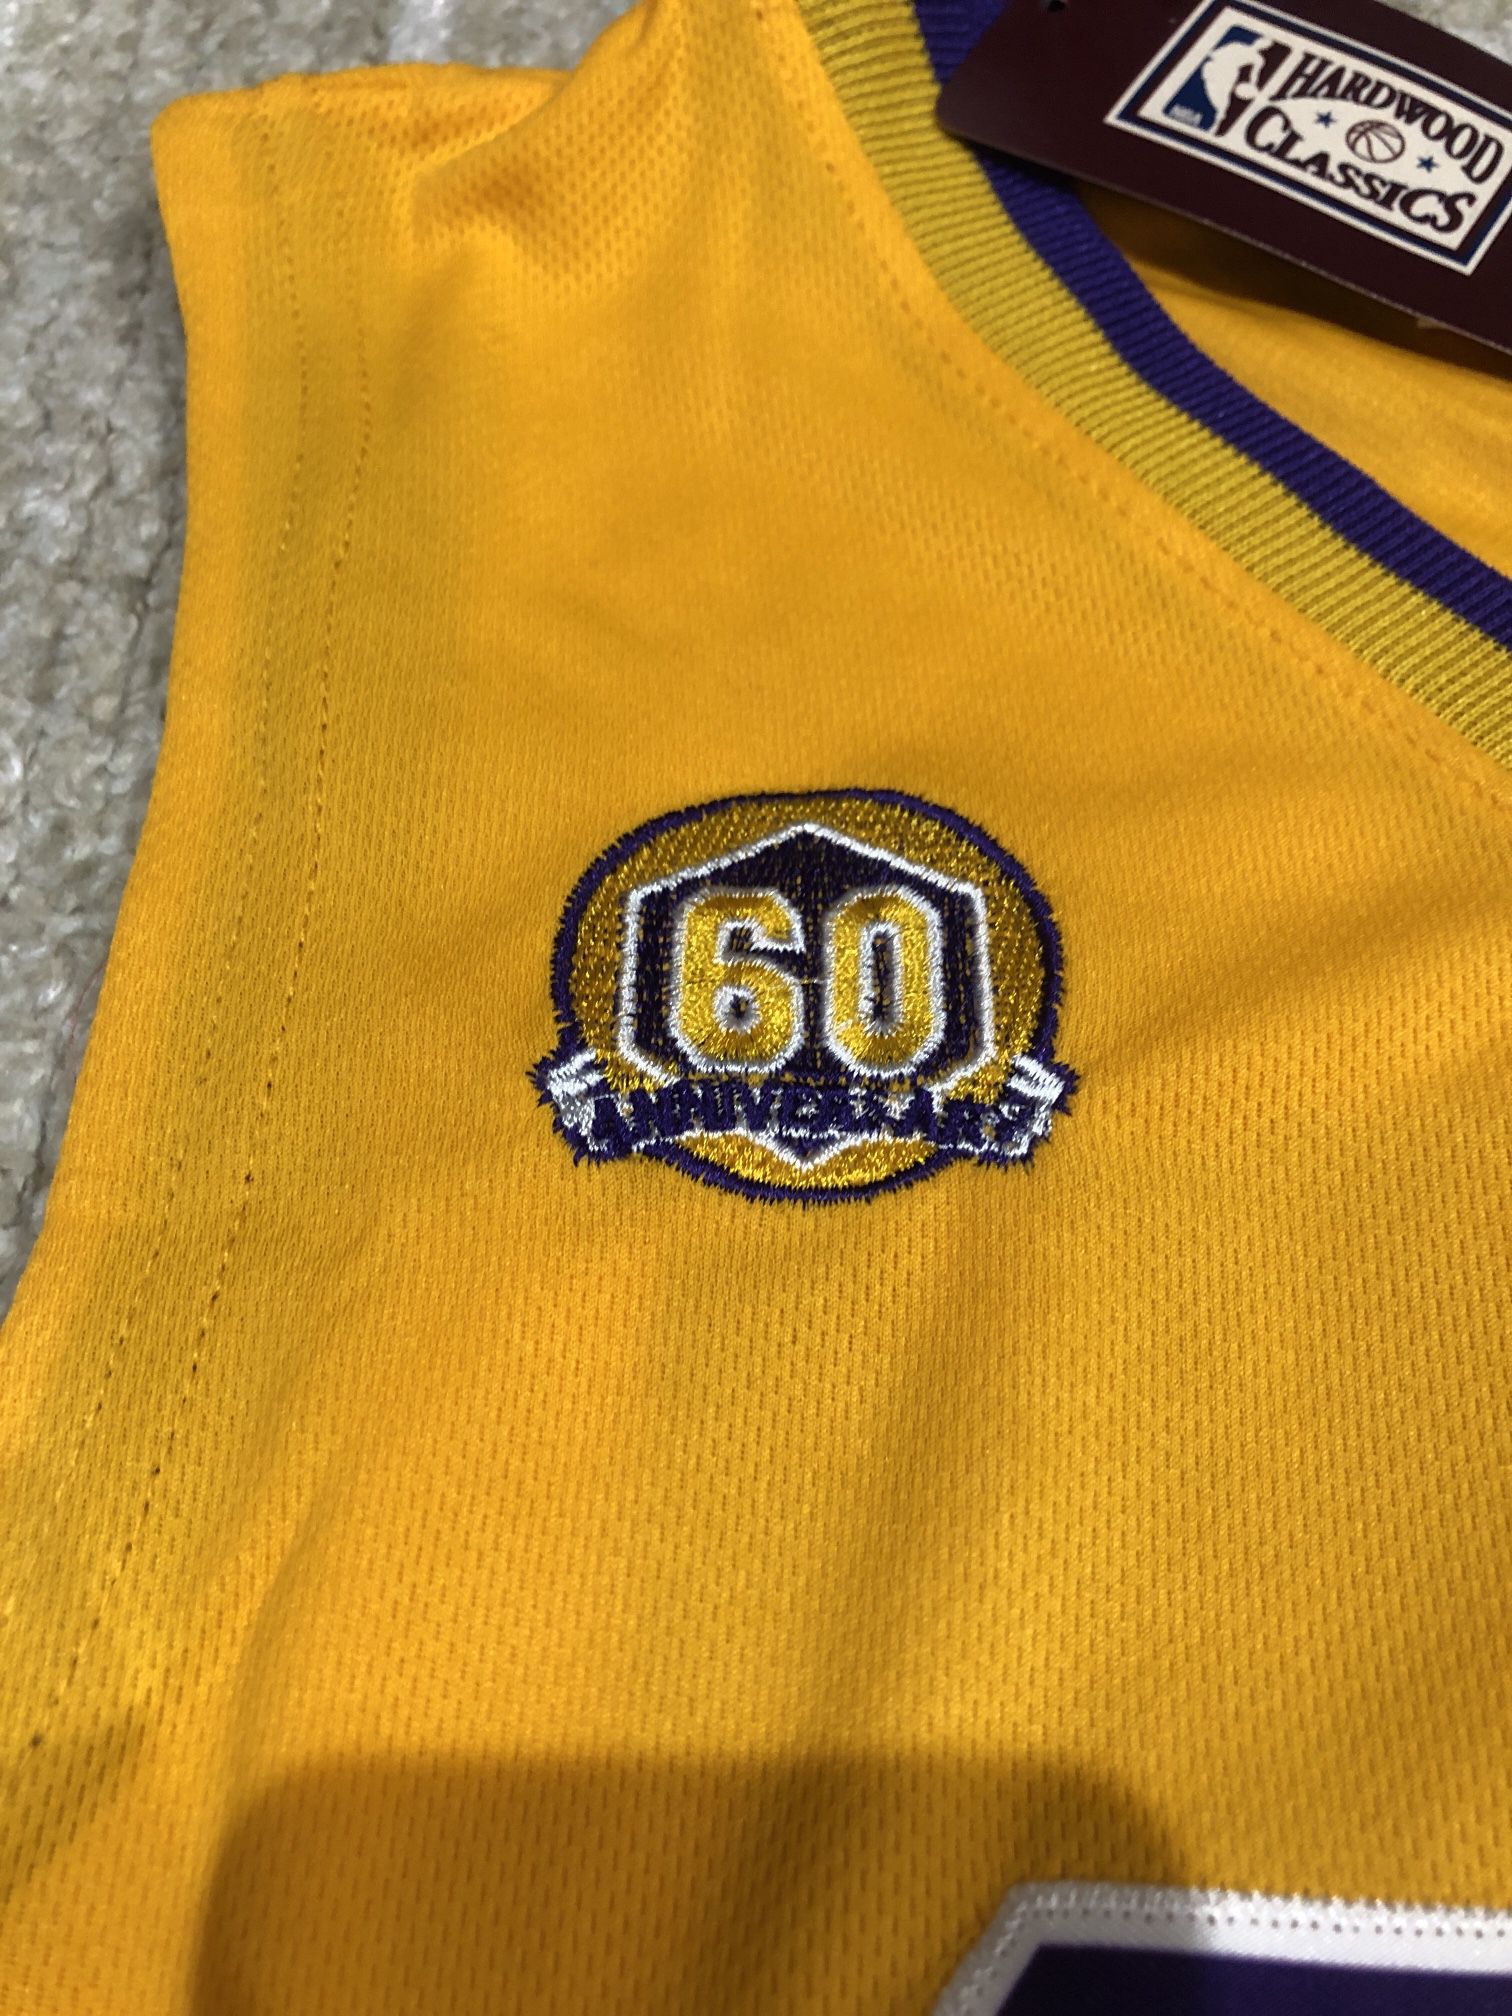 Youth Kobe Bryant Lakers Jersey for Sale in Hampton, VA - OfferUp